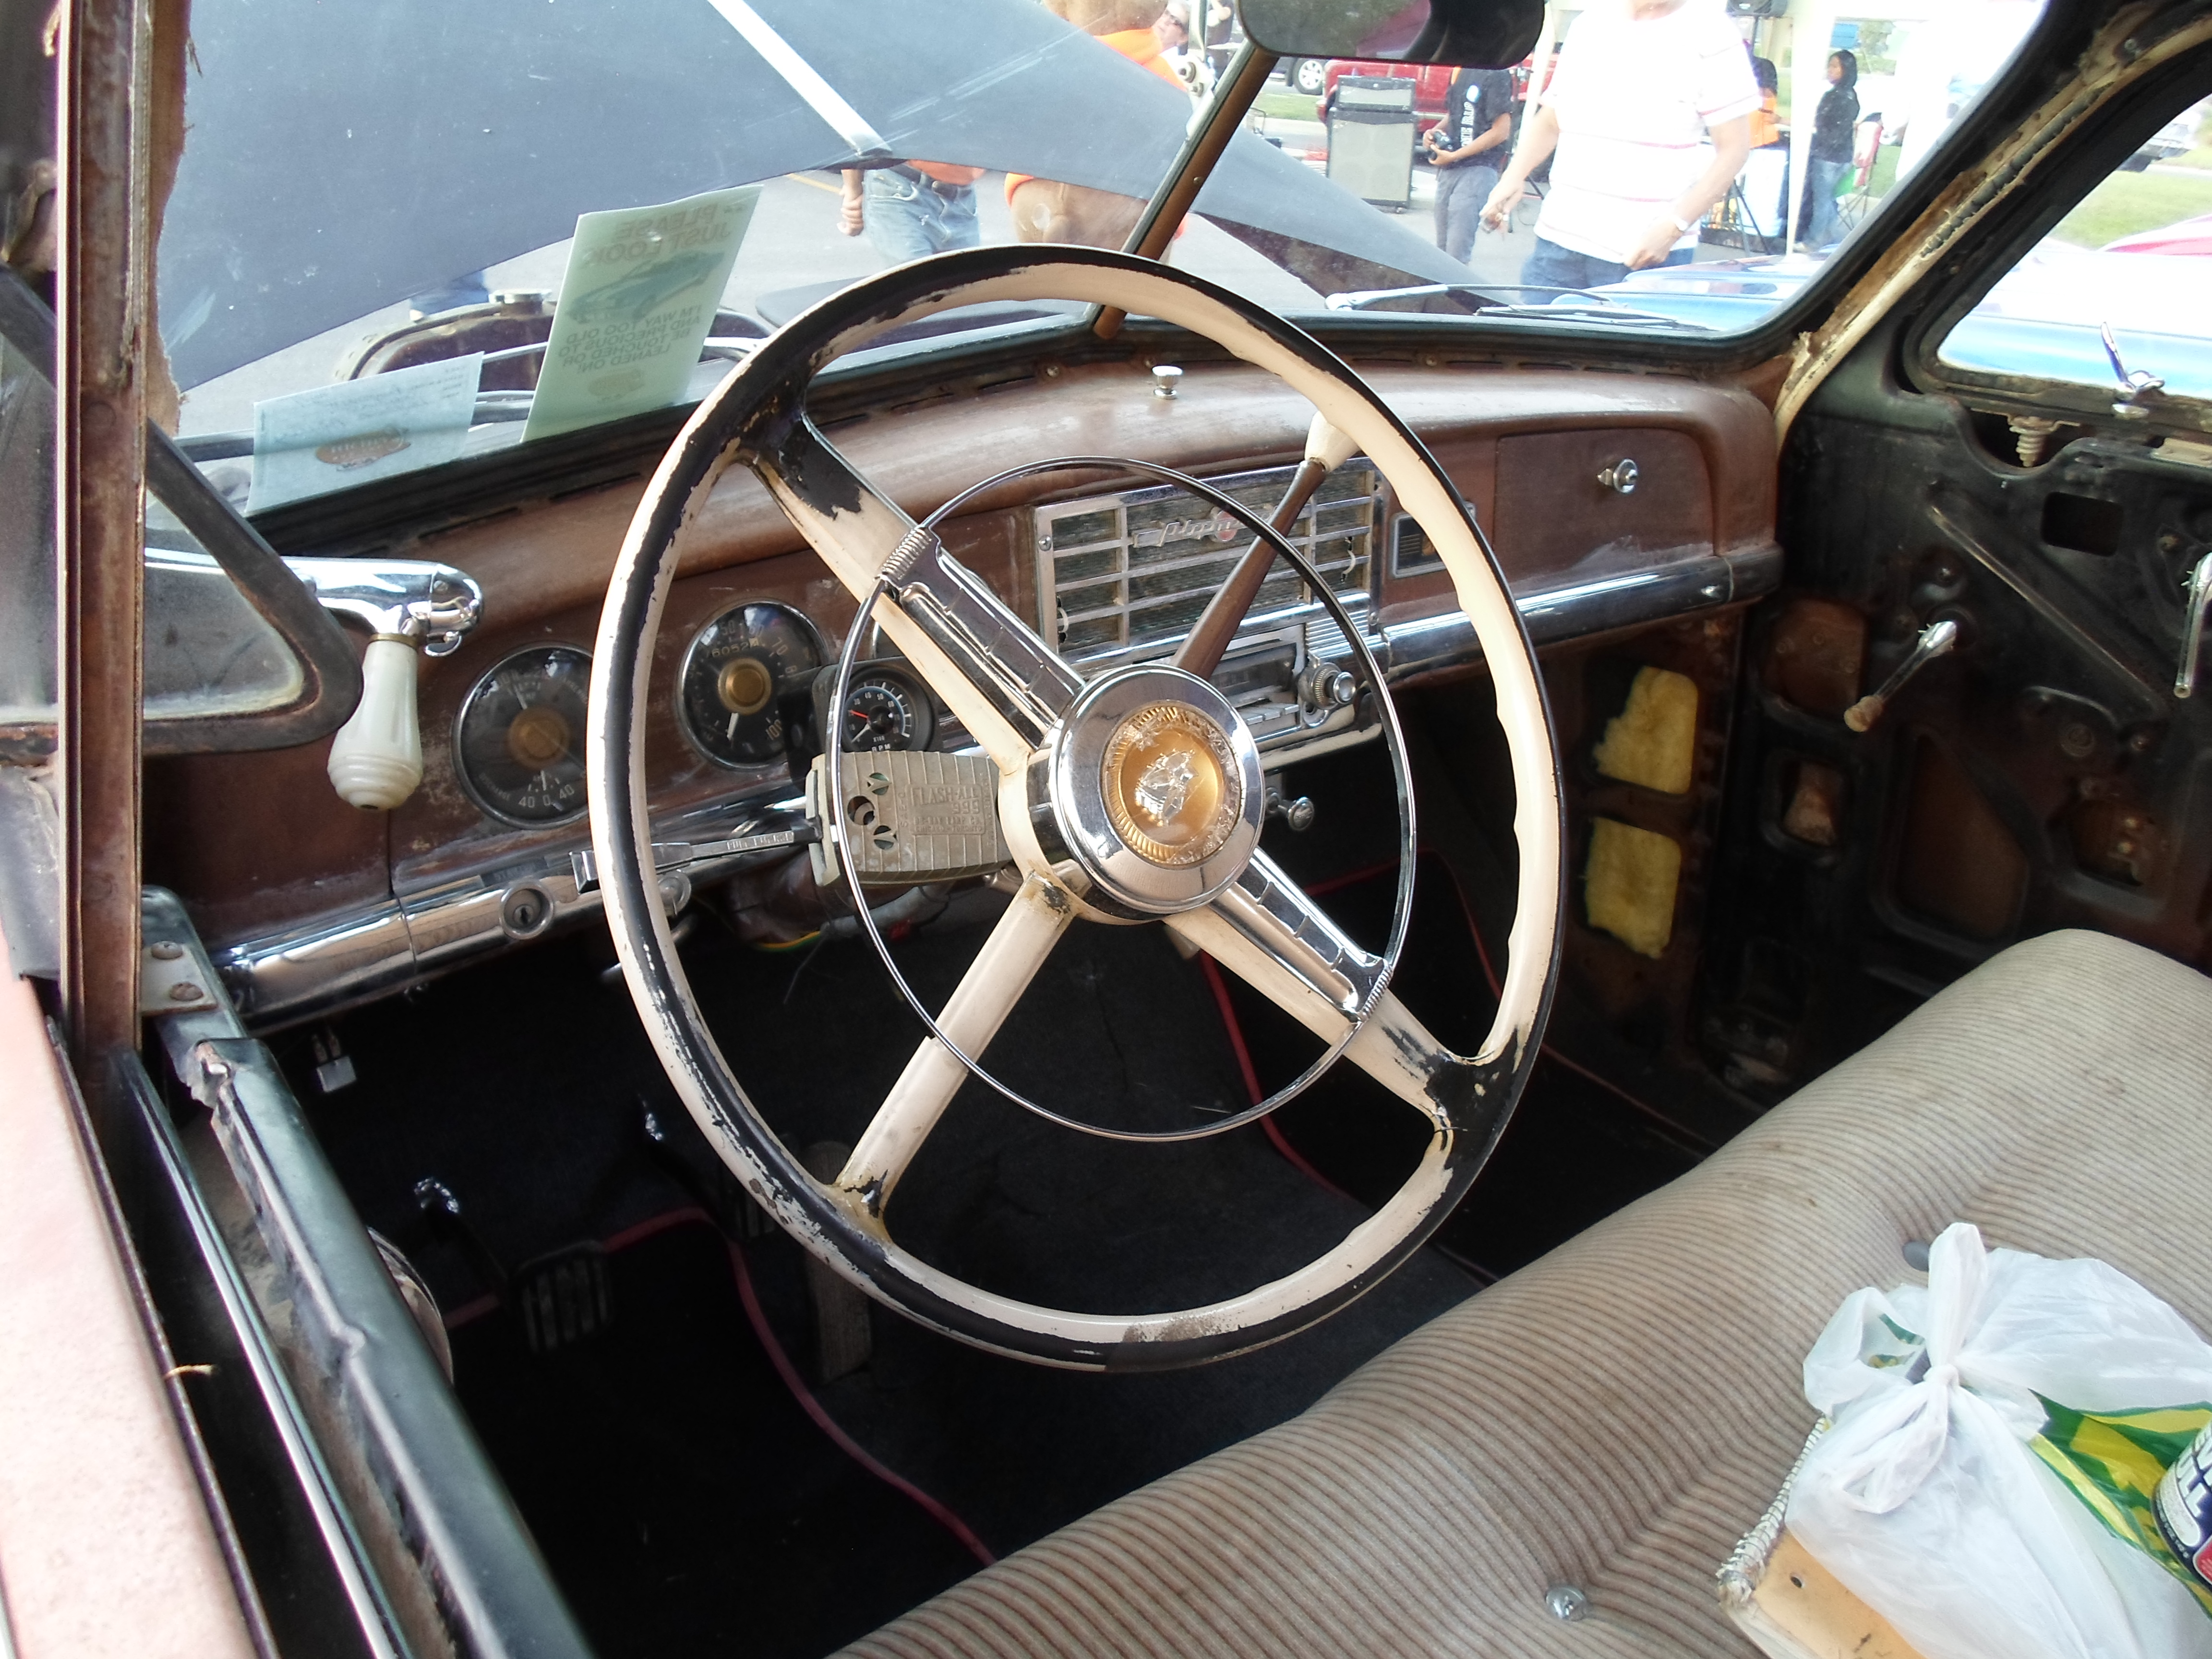 File:1949 Plymouth Deluxe interior (9631197936).jpg - Wikimedia Commons